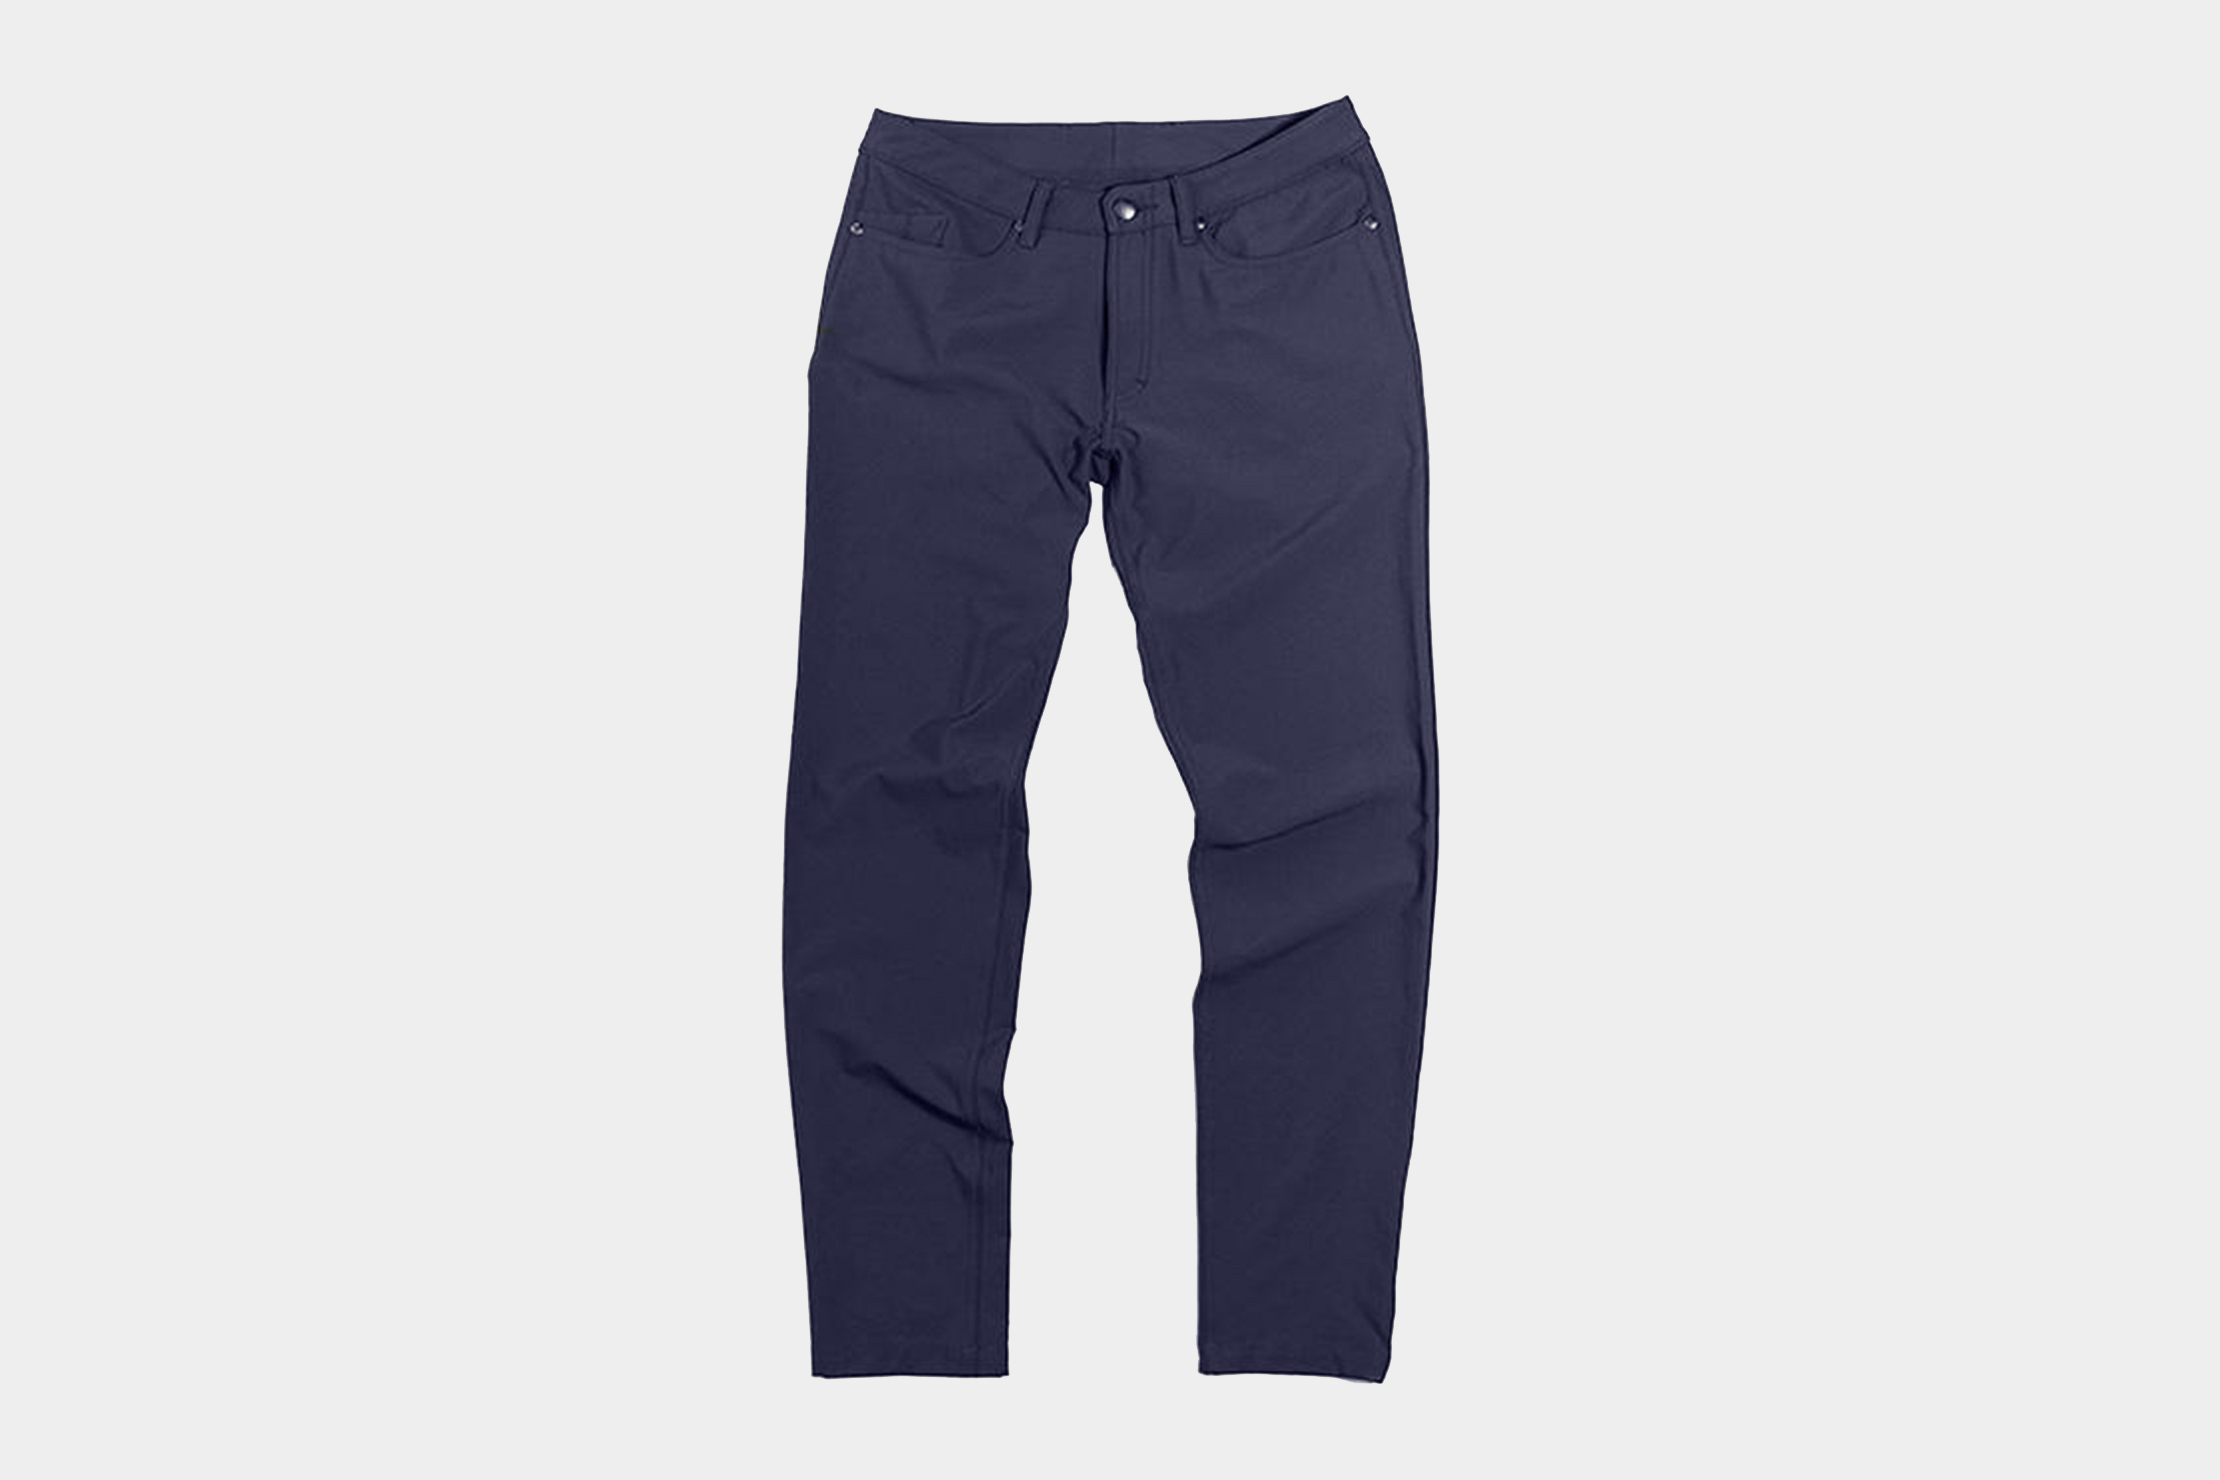 Proof Rover Pant (Slim) Review